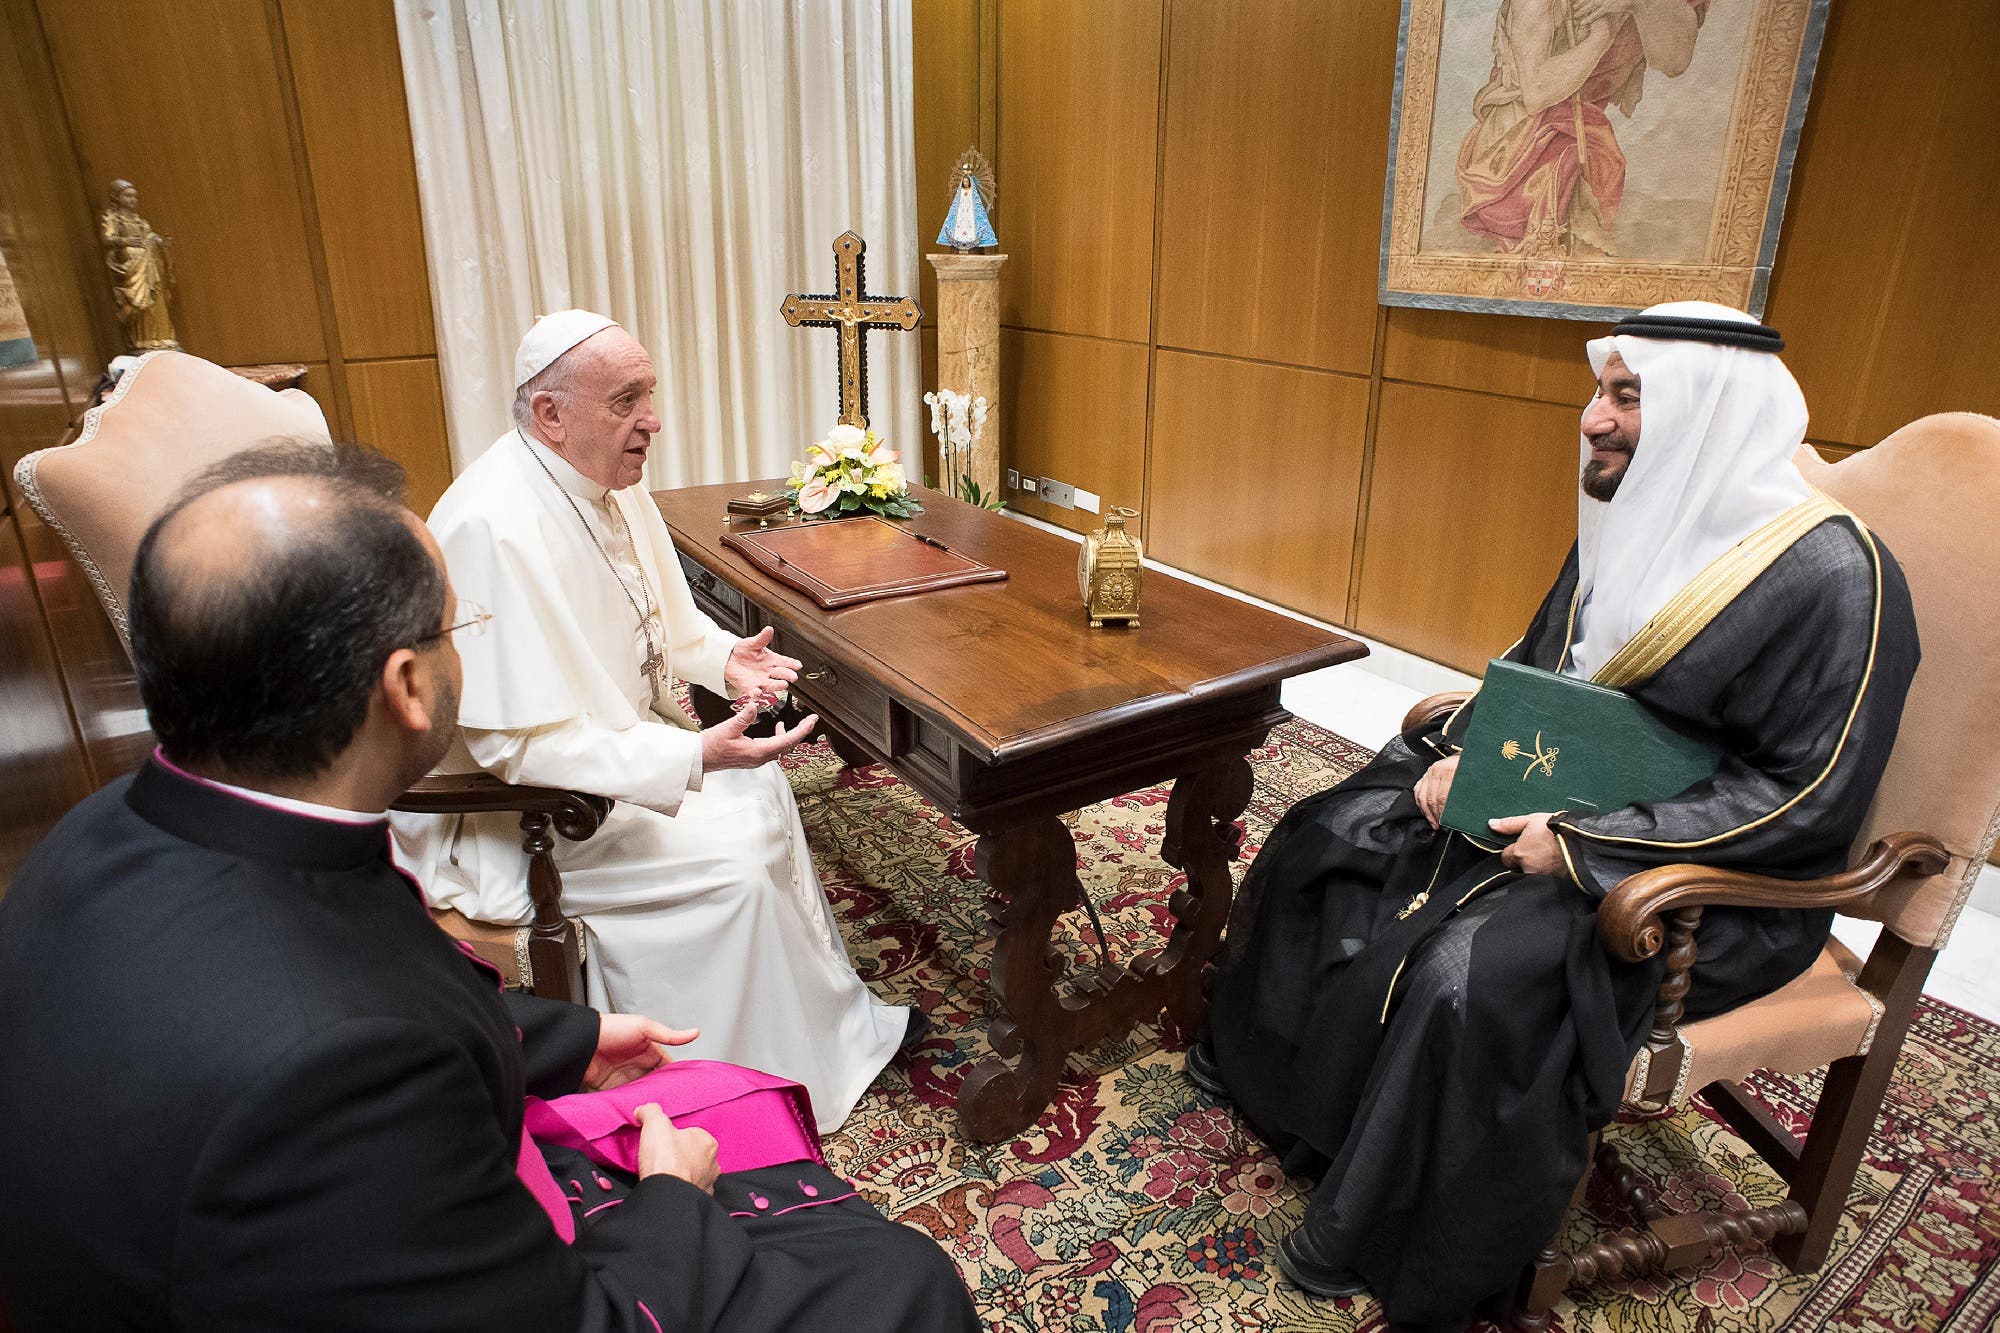 This handout picture released by the Vatican press office shows Pope Francis (L) during an audience with Abdullah bin Fahd al-Luhaidan on November 22, 2017 at the Vatican. (AFP)